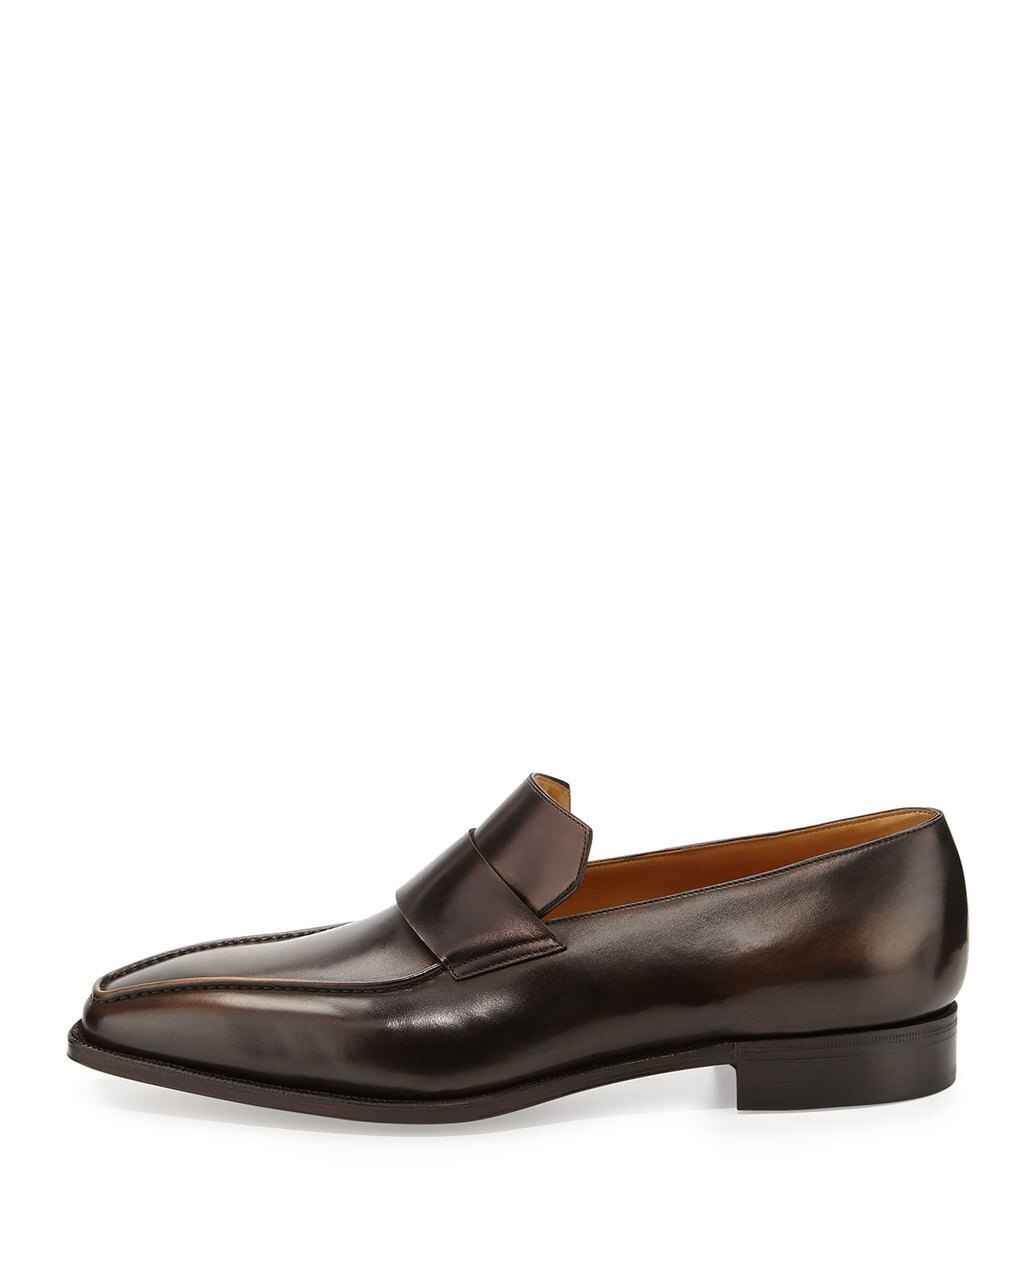 Brand New Corthay Massai Black Calf Leather Loafers in Vieux Bois patina